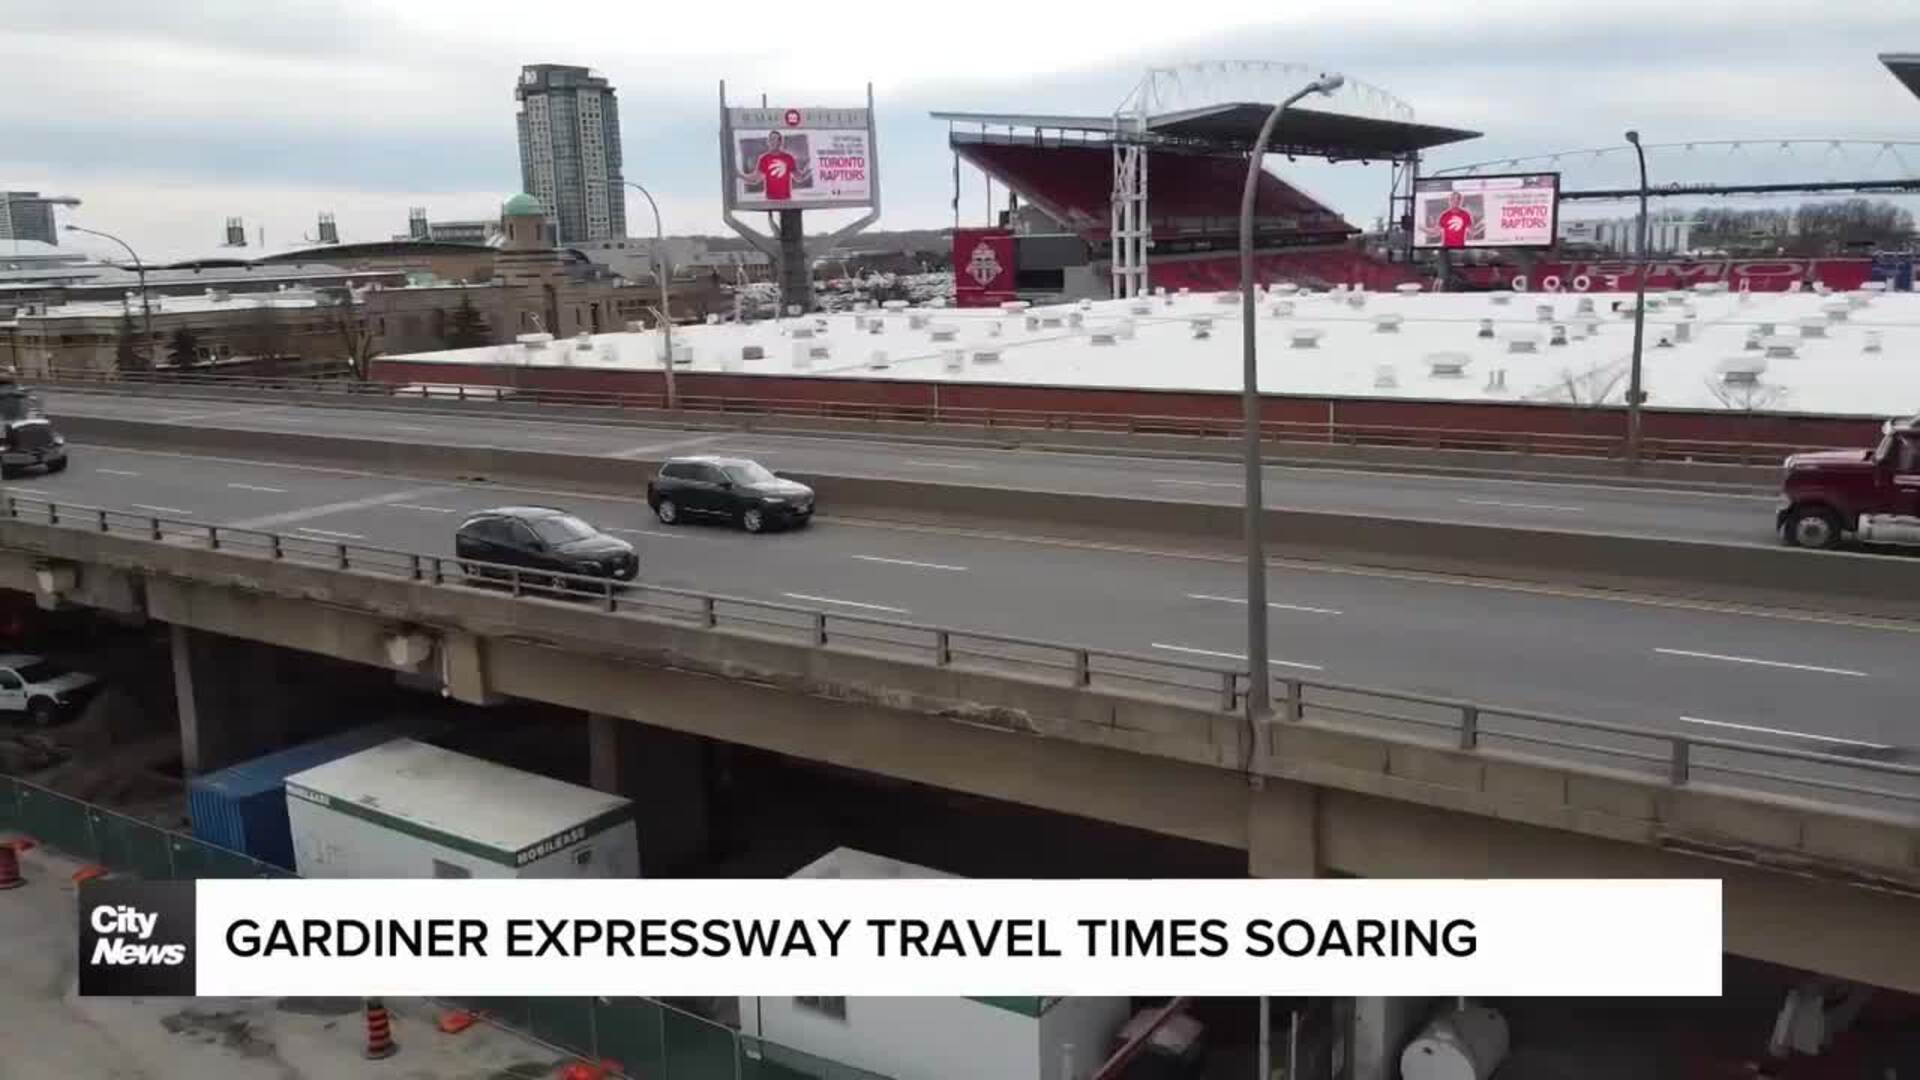 Gardiner Expressway travel times soaring due to construction